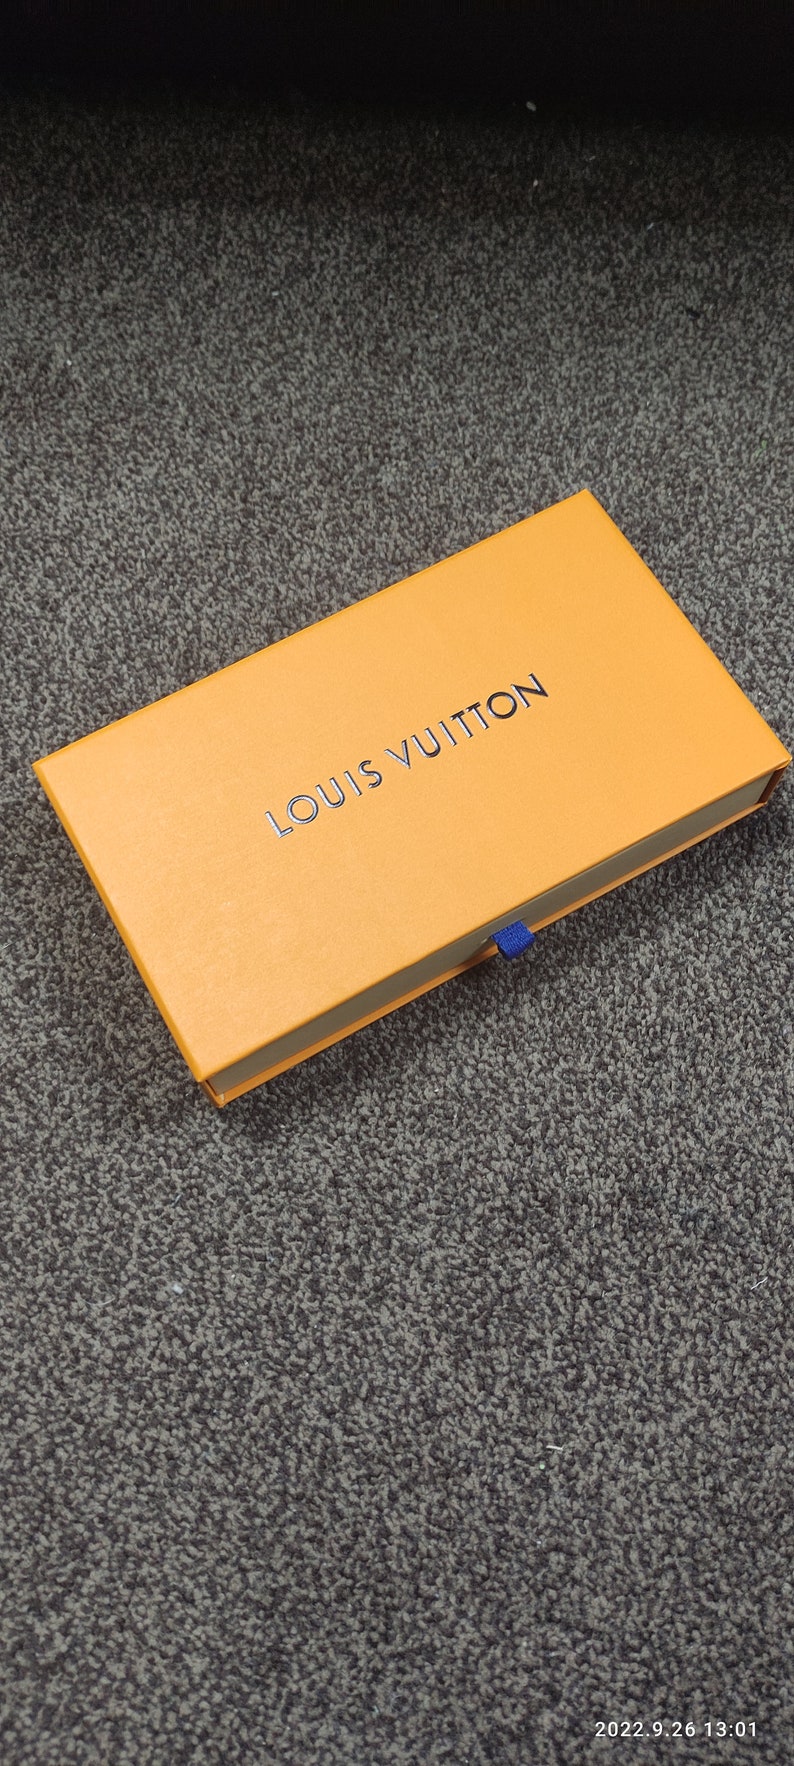 Louis Vuitton Holiday 2022 Packaging Corporation